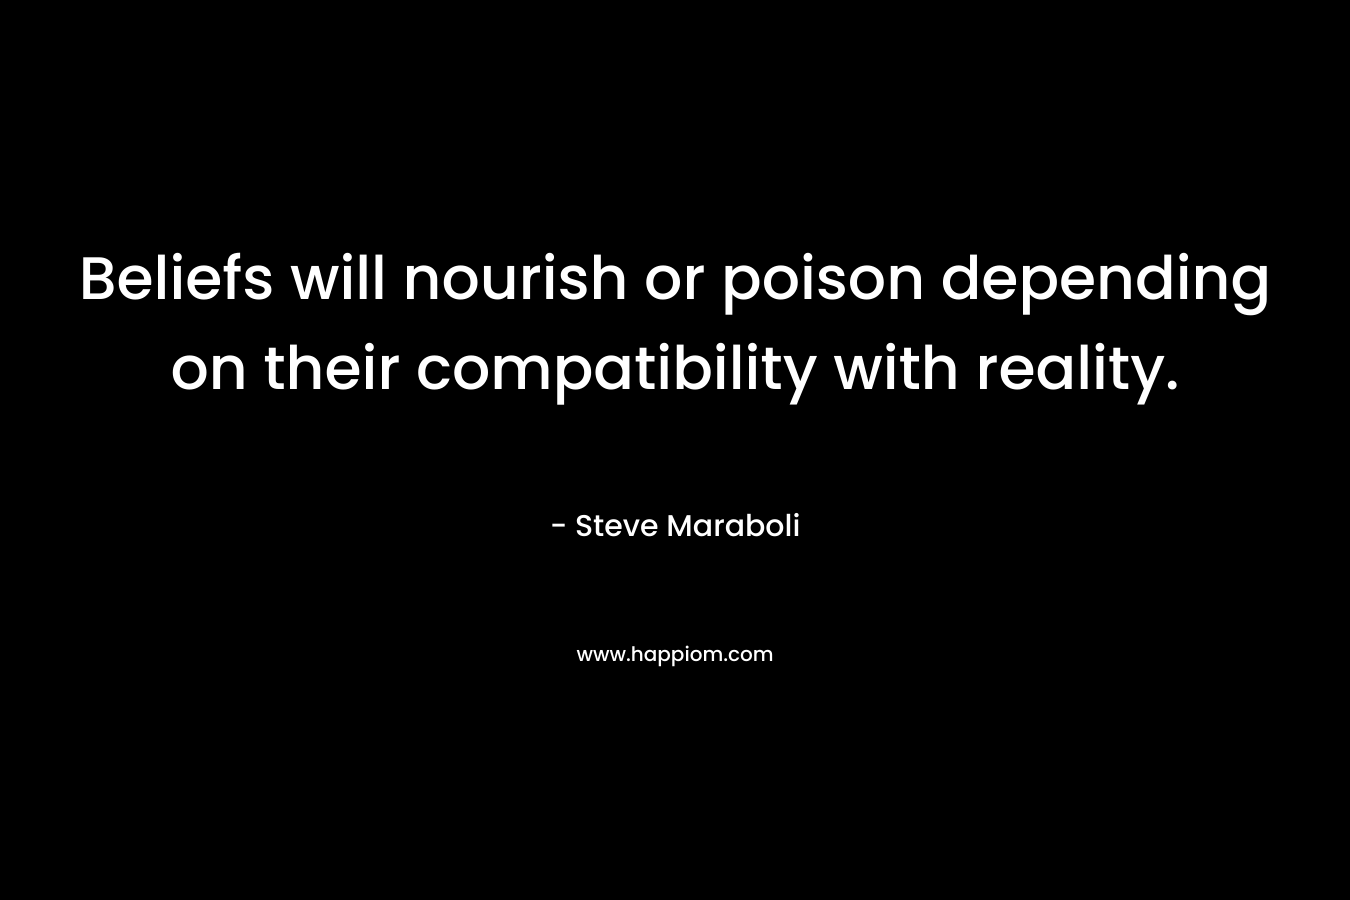 Beliefs will nourish or poison depending on their compatibility with reality.